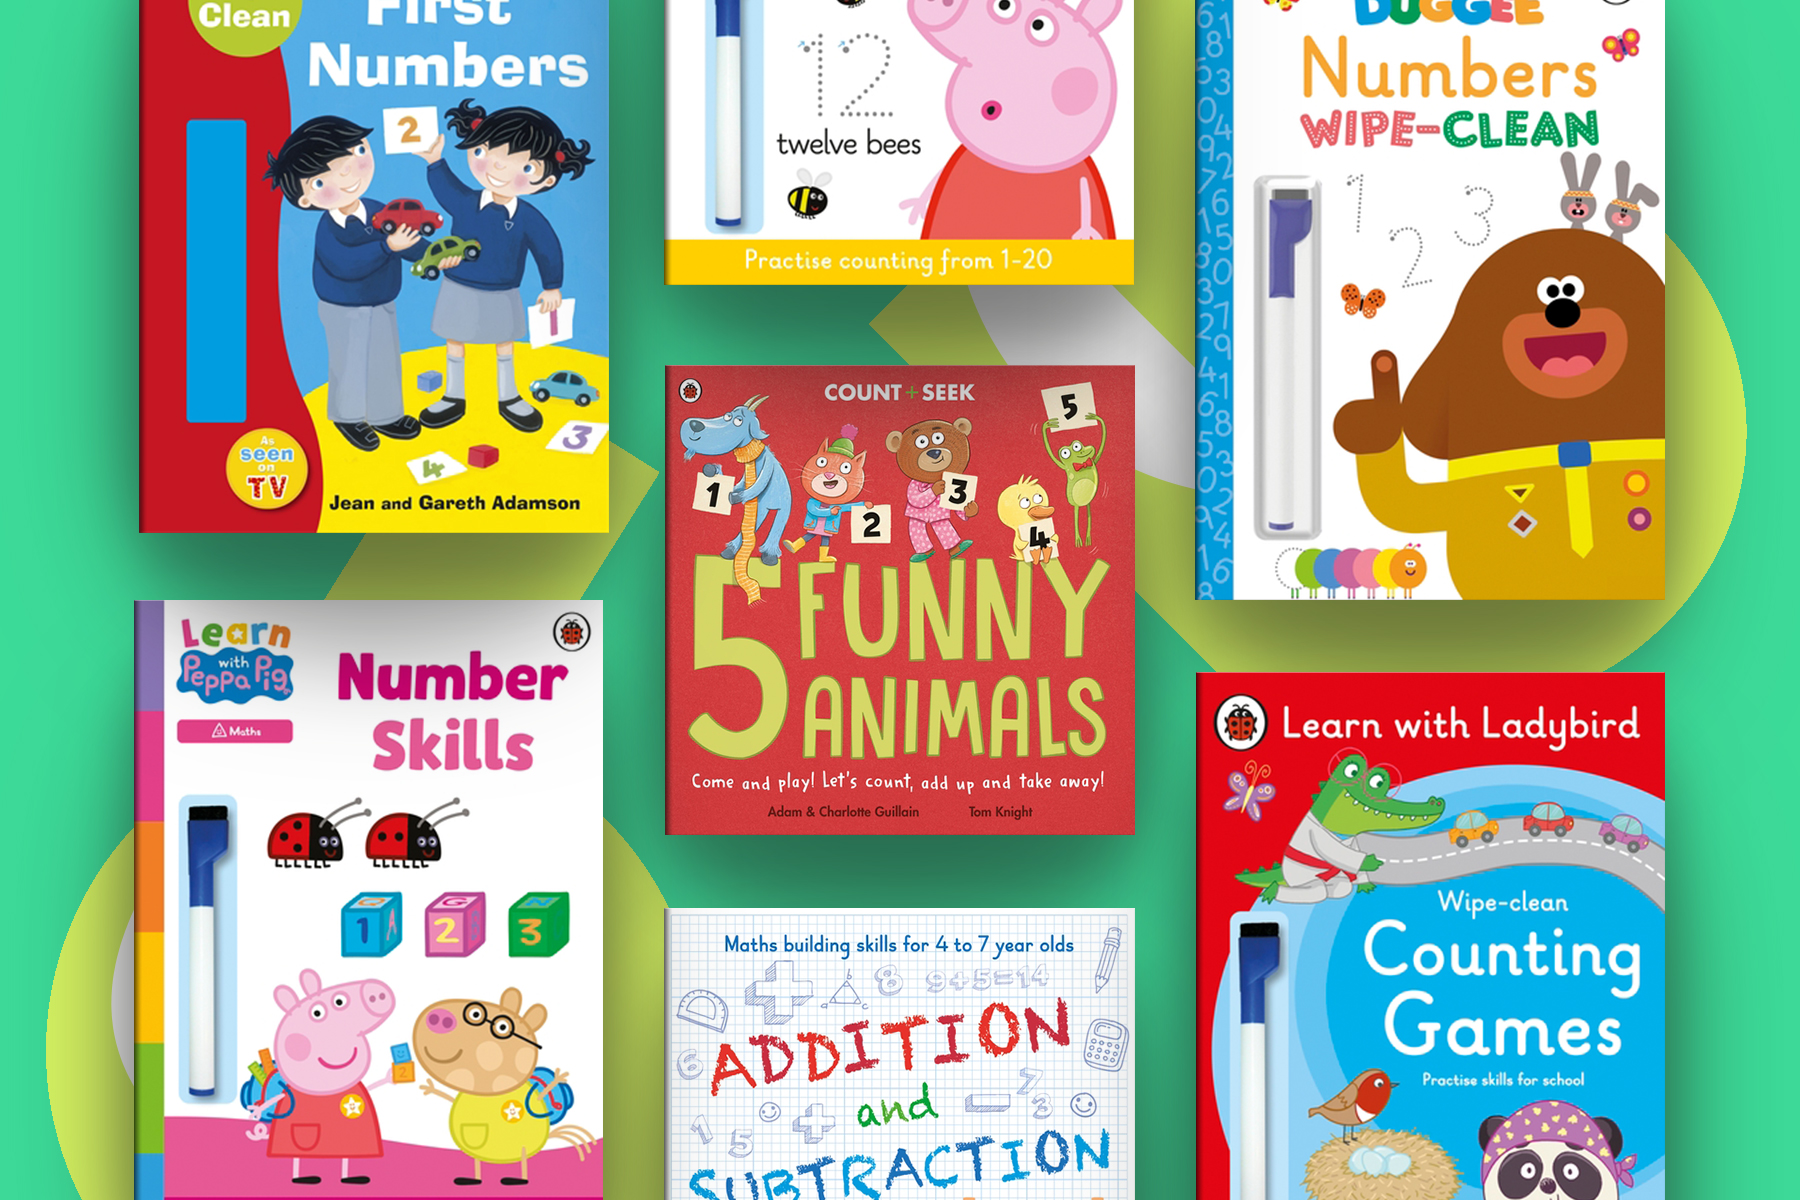 An image showing a selection of childrens books for children learning numbers and counting. They sit on a green background with light green and white glyphs of the letters L and B.